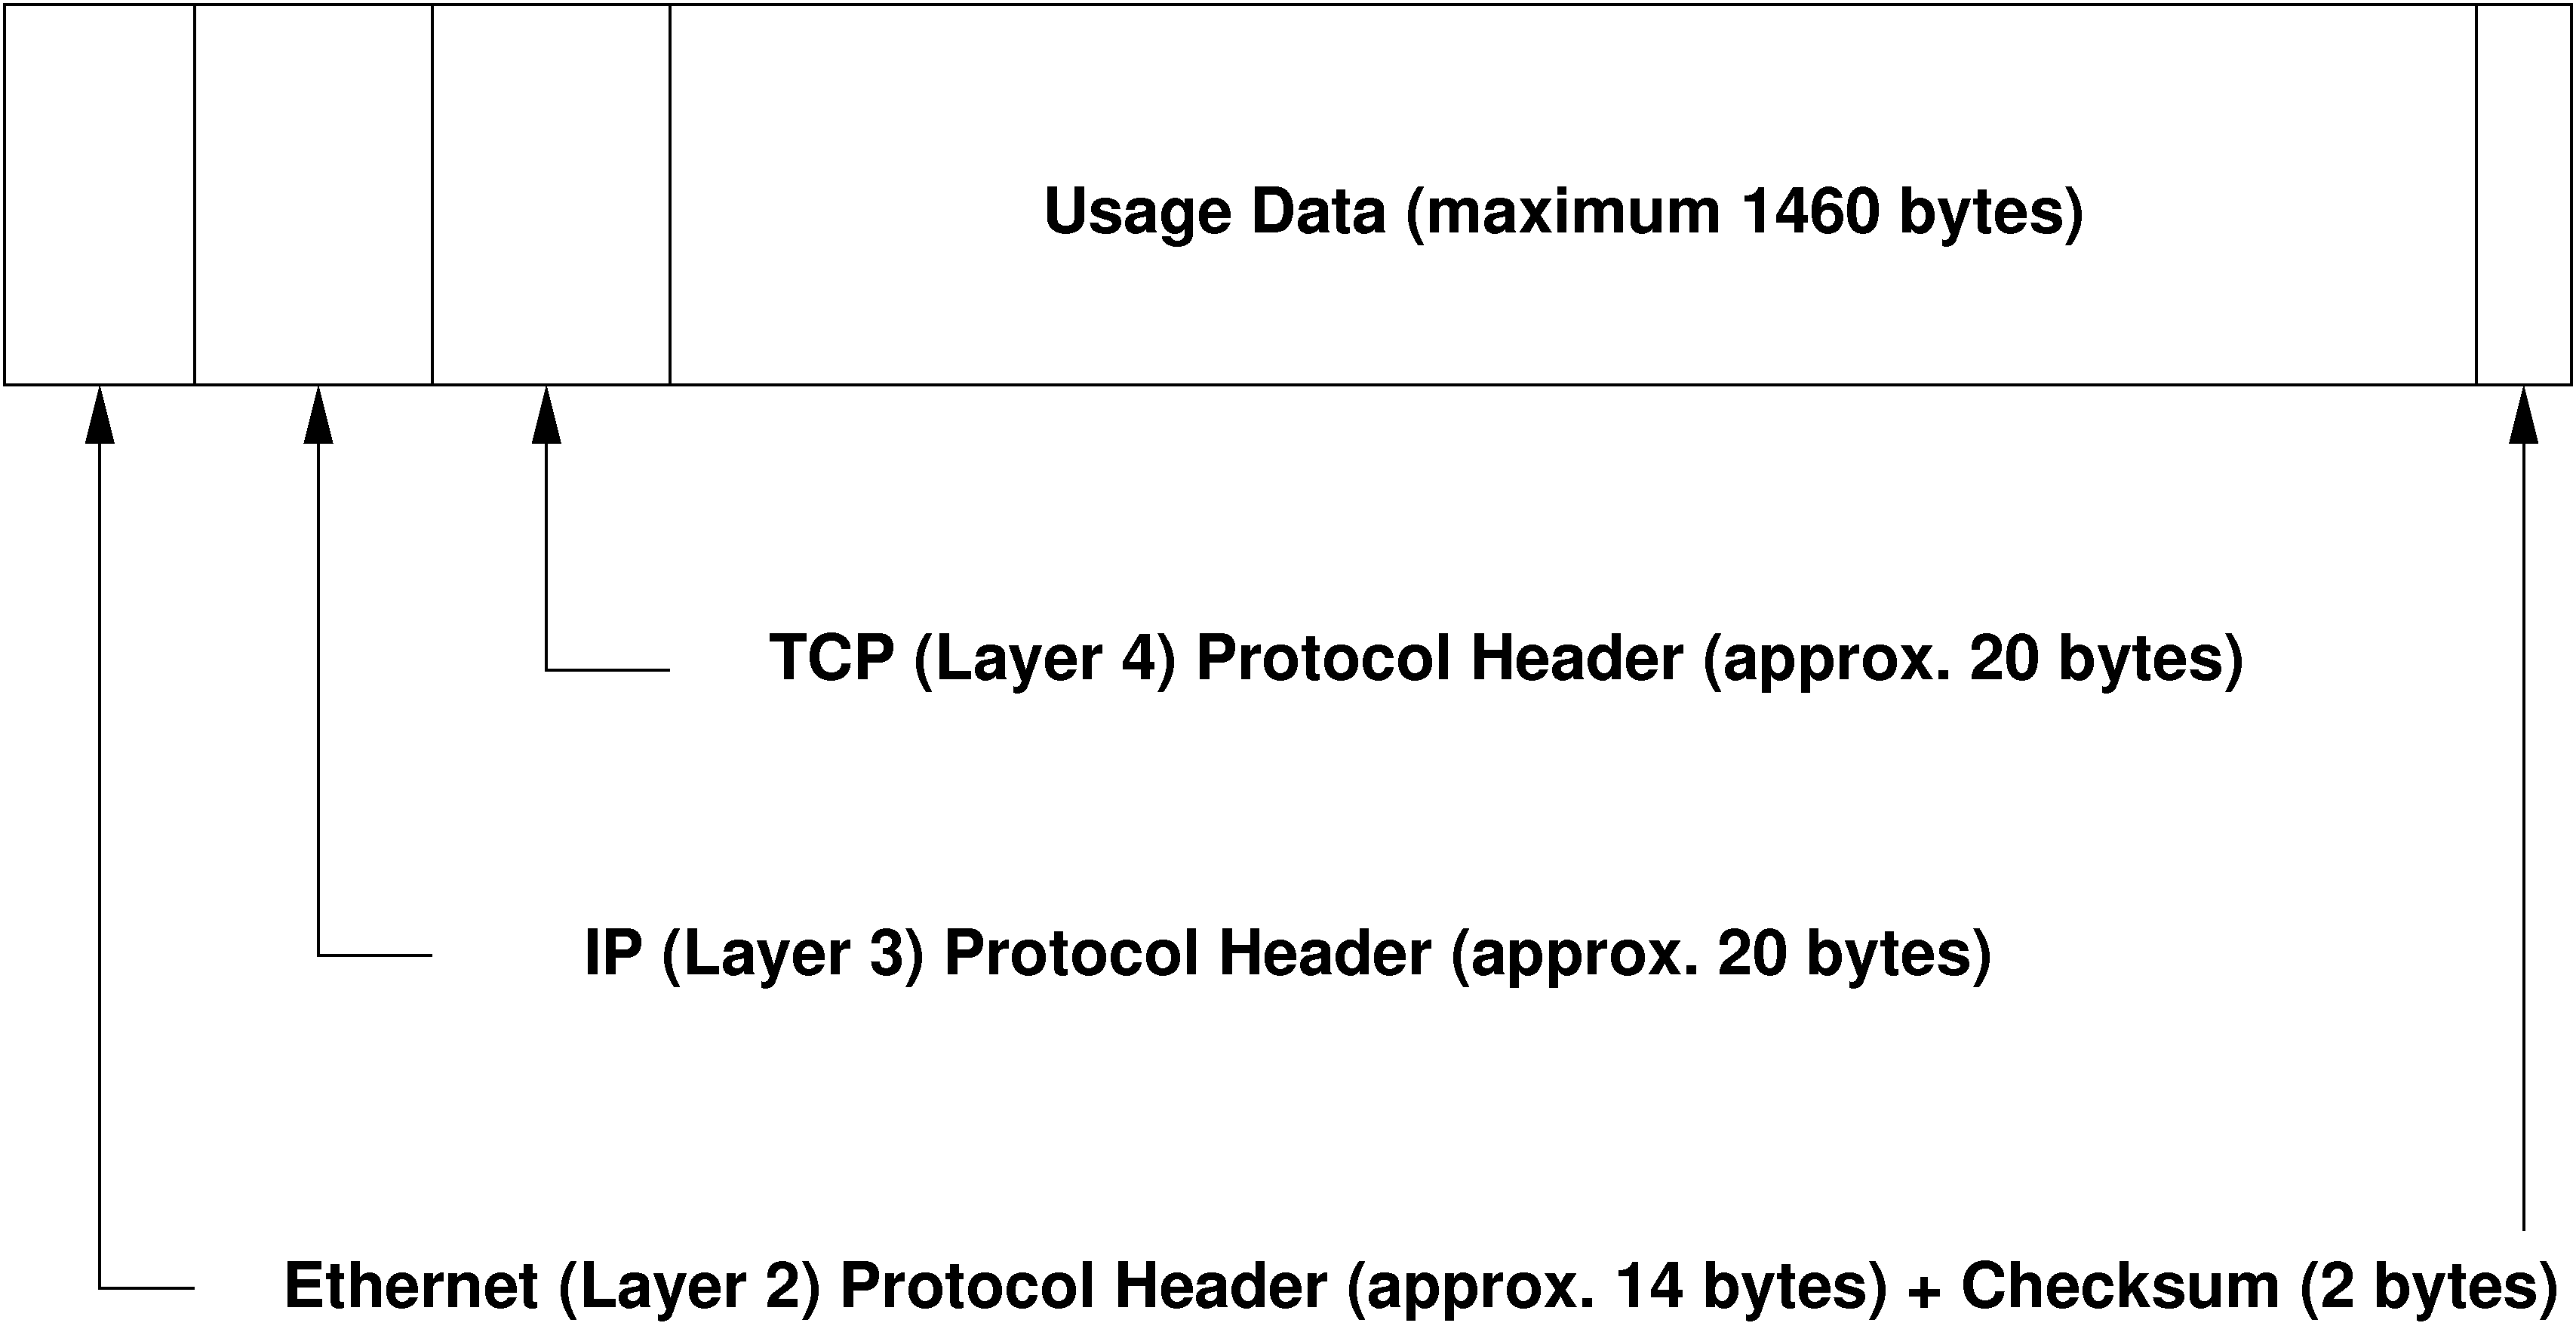 TCP/IP Ethernet Packet